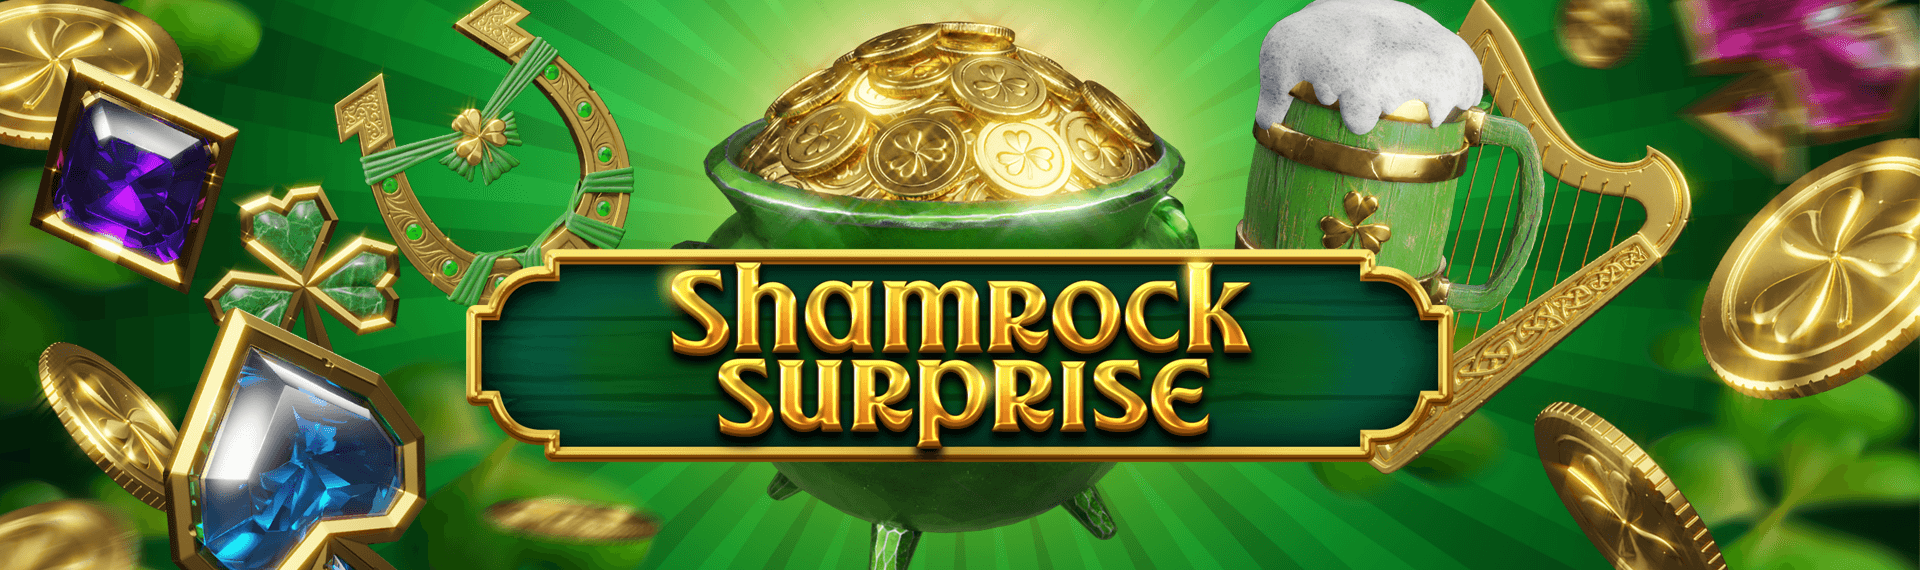 Shamrock Surprise Screenshot <br />
<b>Notice</b>:  Undefined variable: key in <b>/var/www/html/wp-content/themes/armadillo/page-game.php</b> on line <b>37</b><br />
1